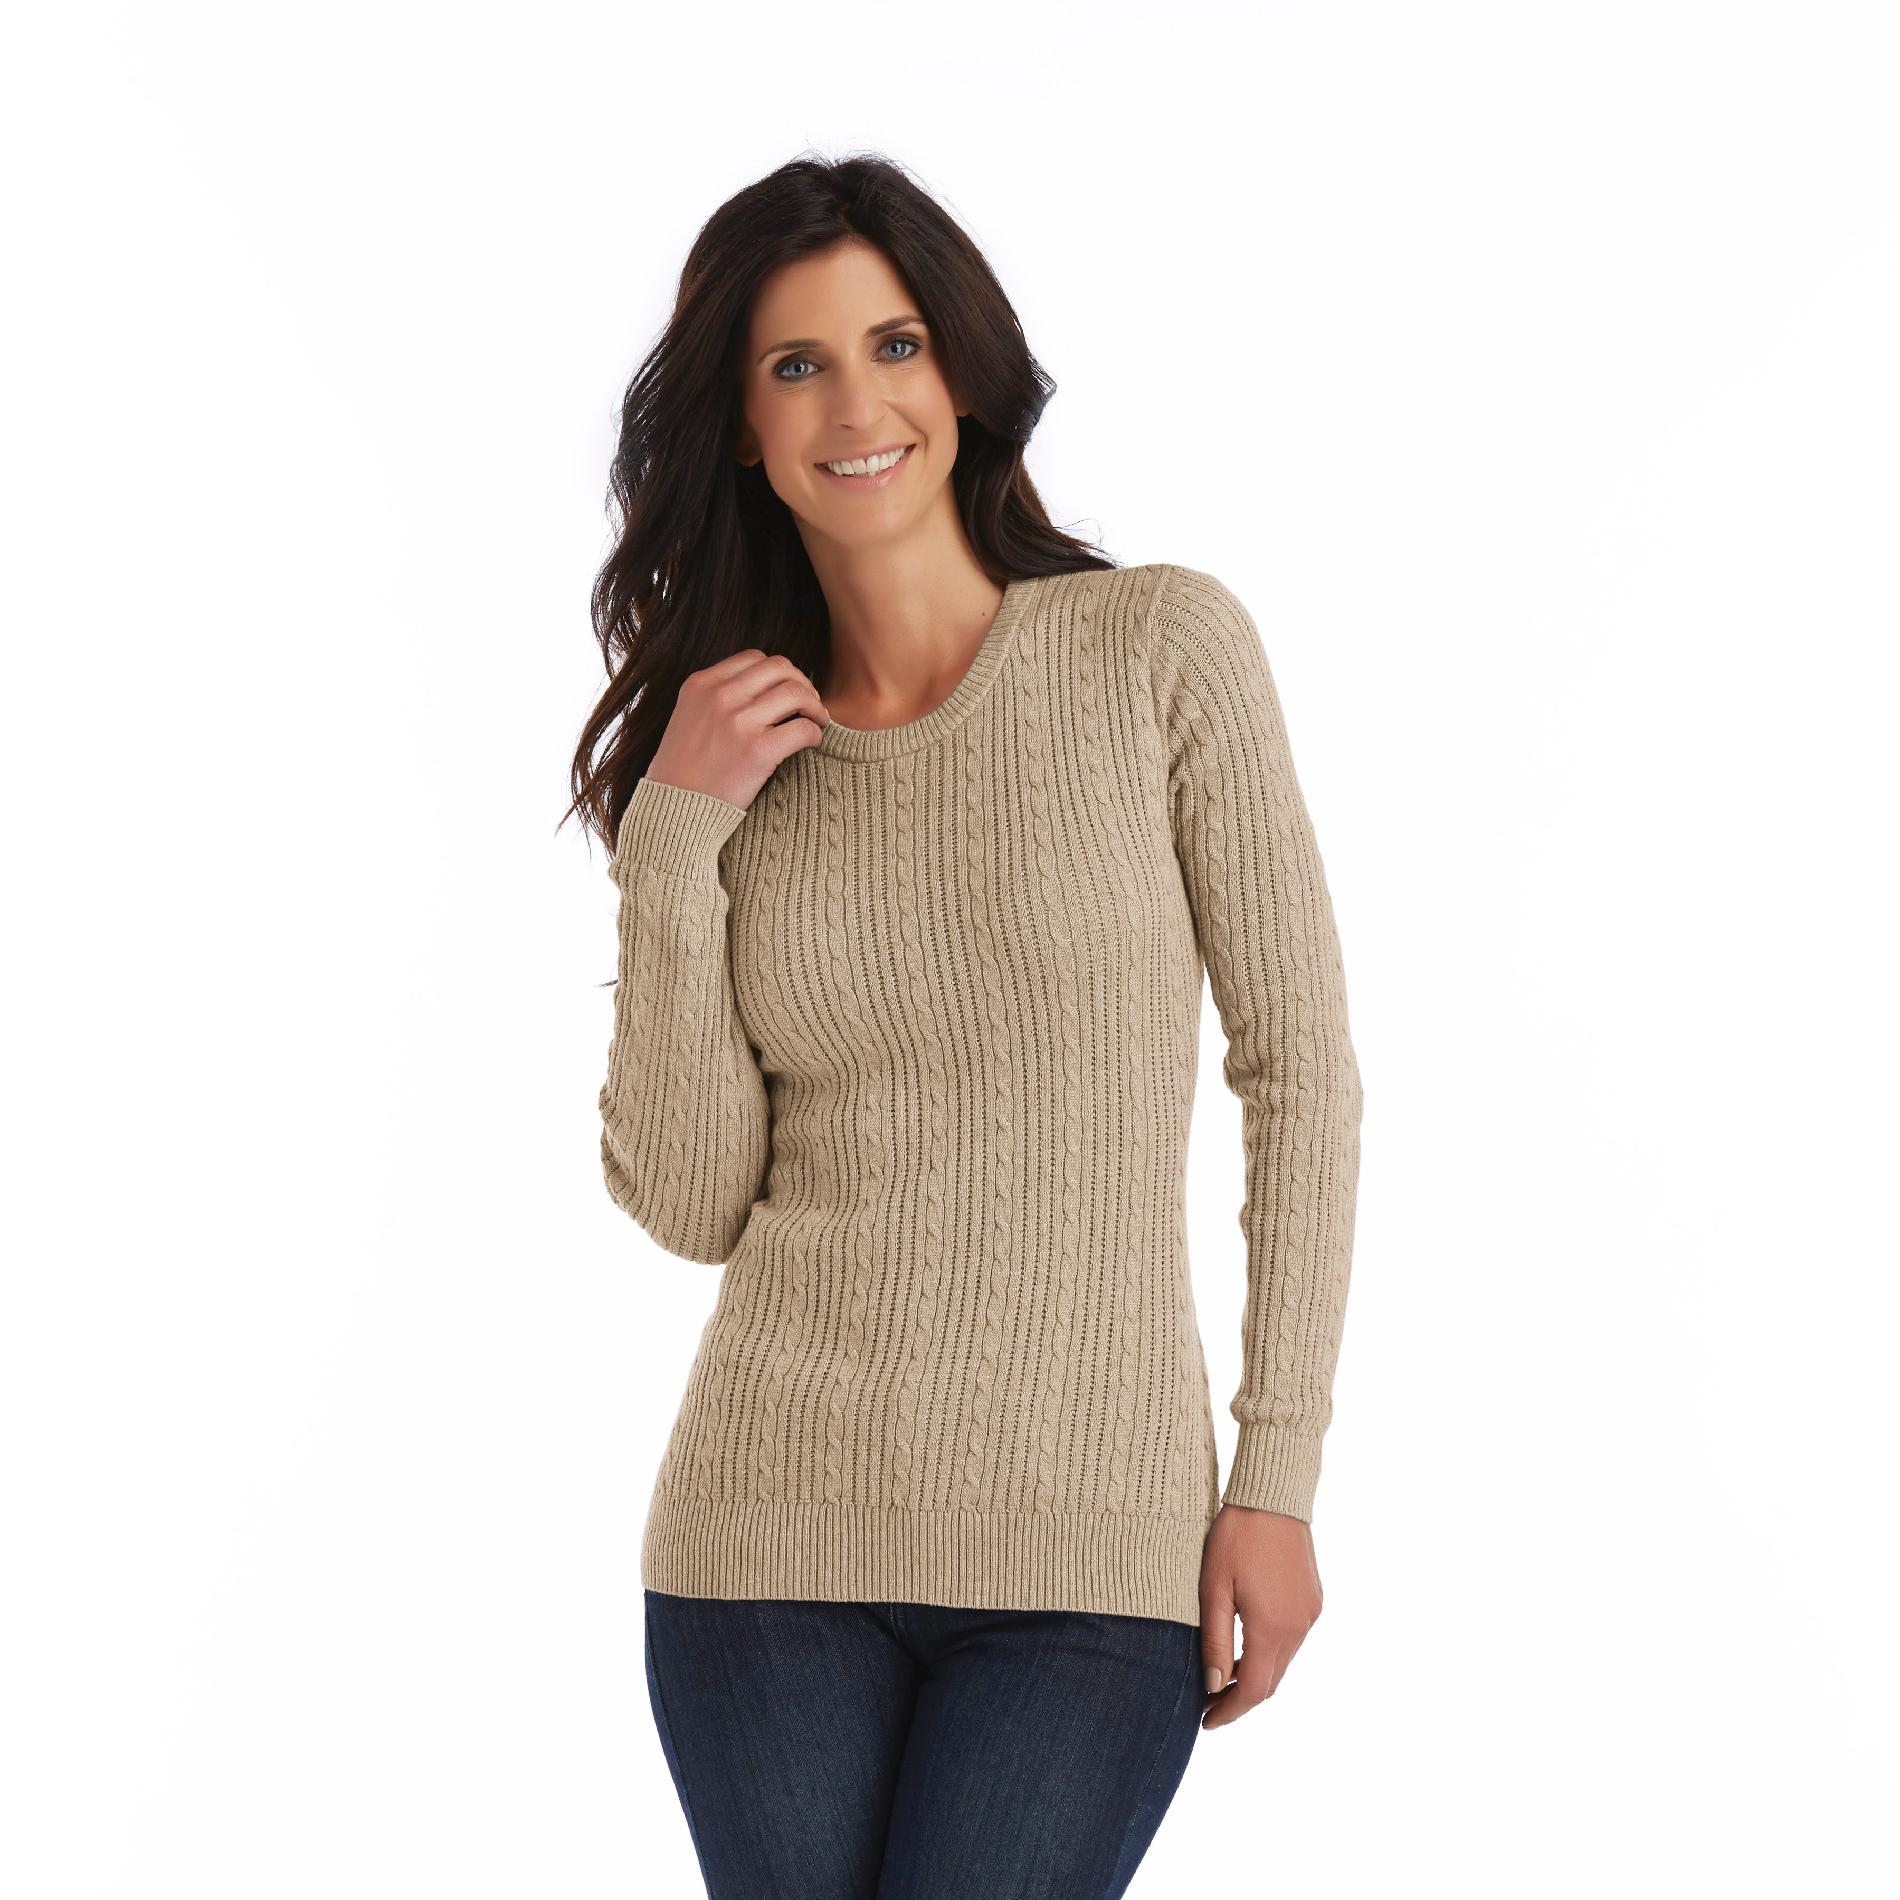 Women's Cable Knit Crew Neck Sweater